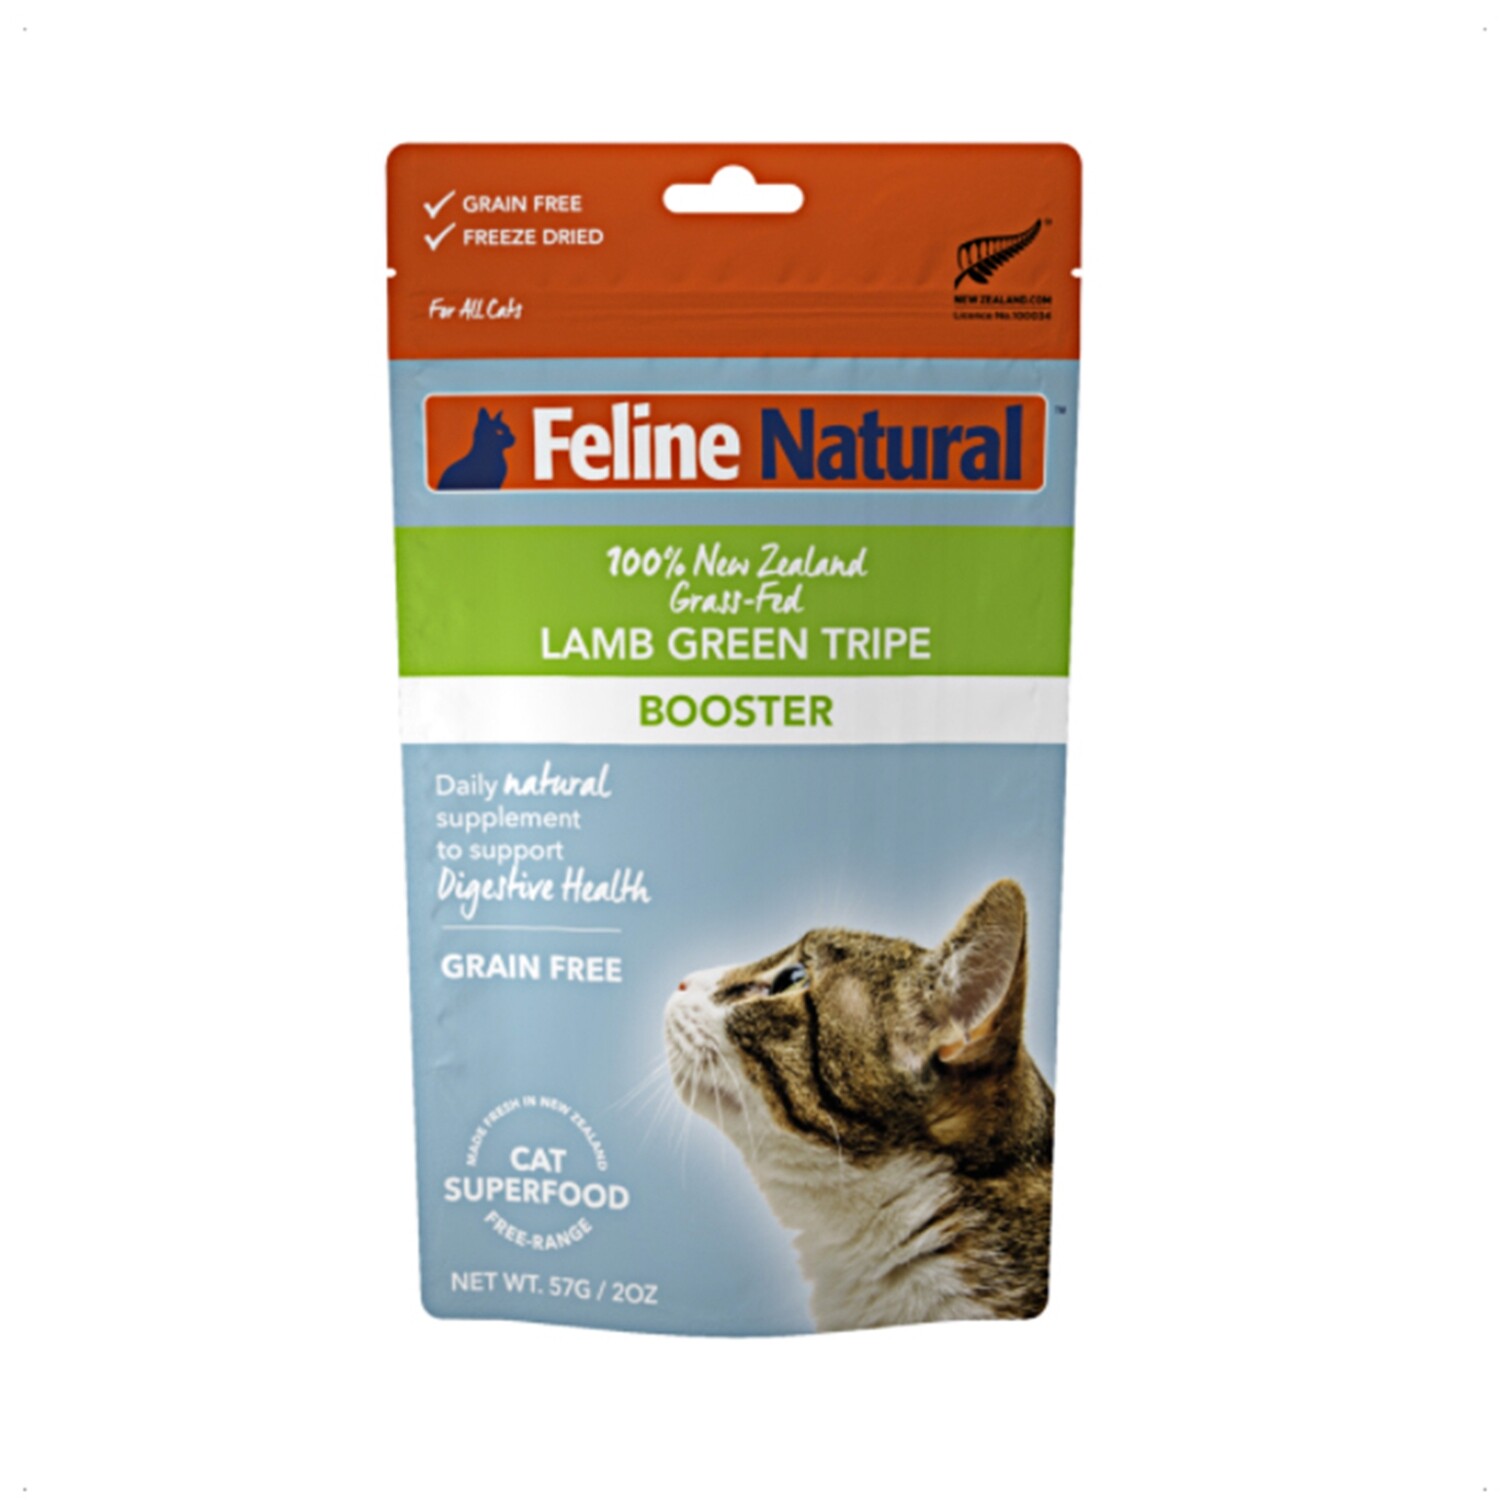 K9 Natural Freeze Dried Lamb Green Tripe Booster for Cats